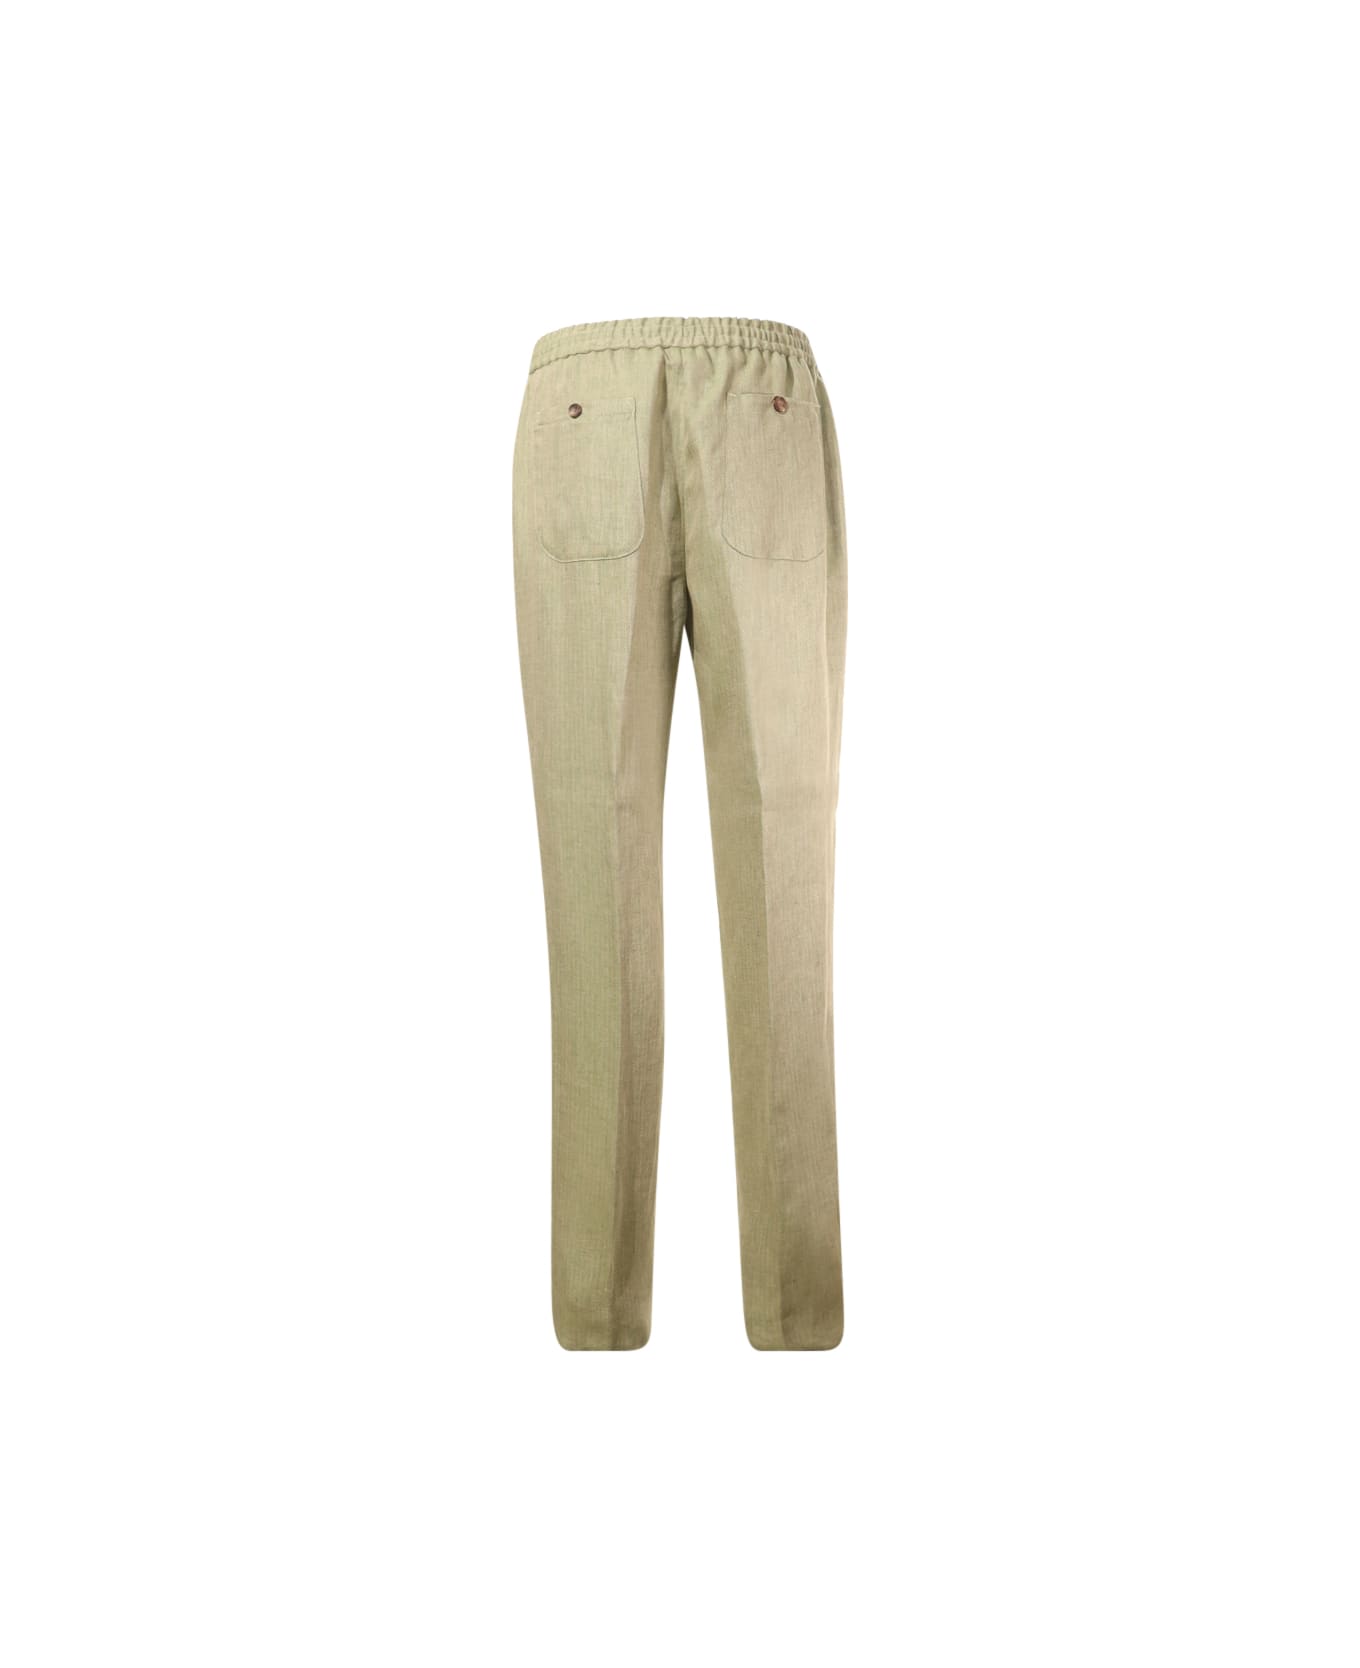 Etro Trousers - Green